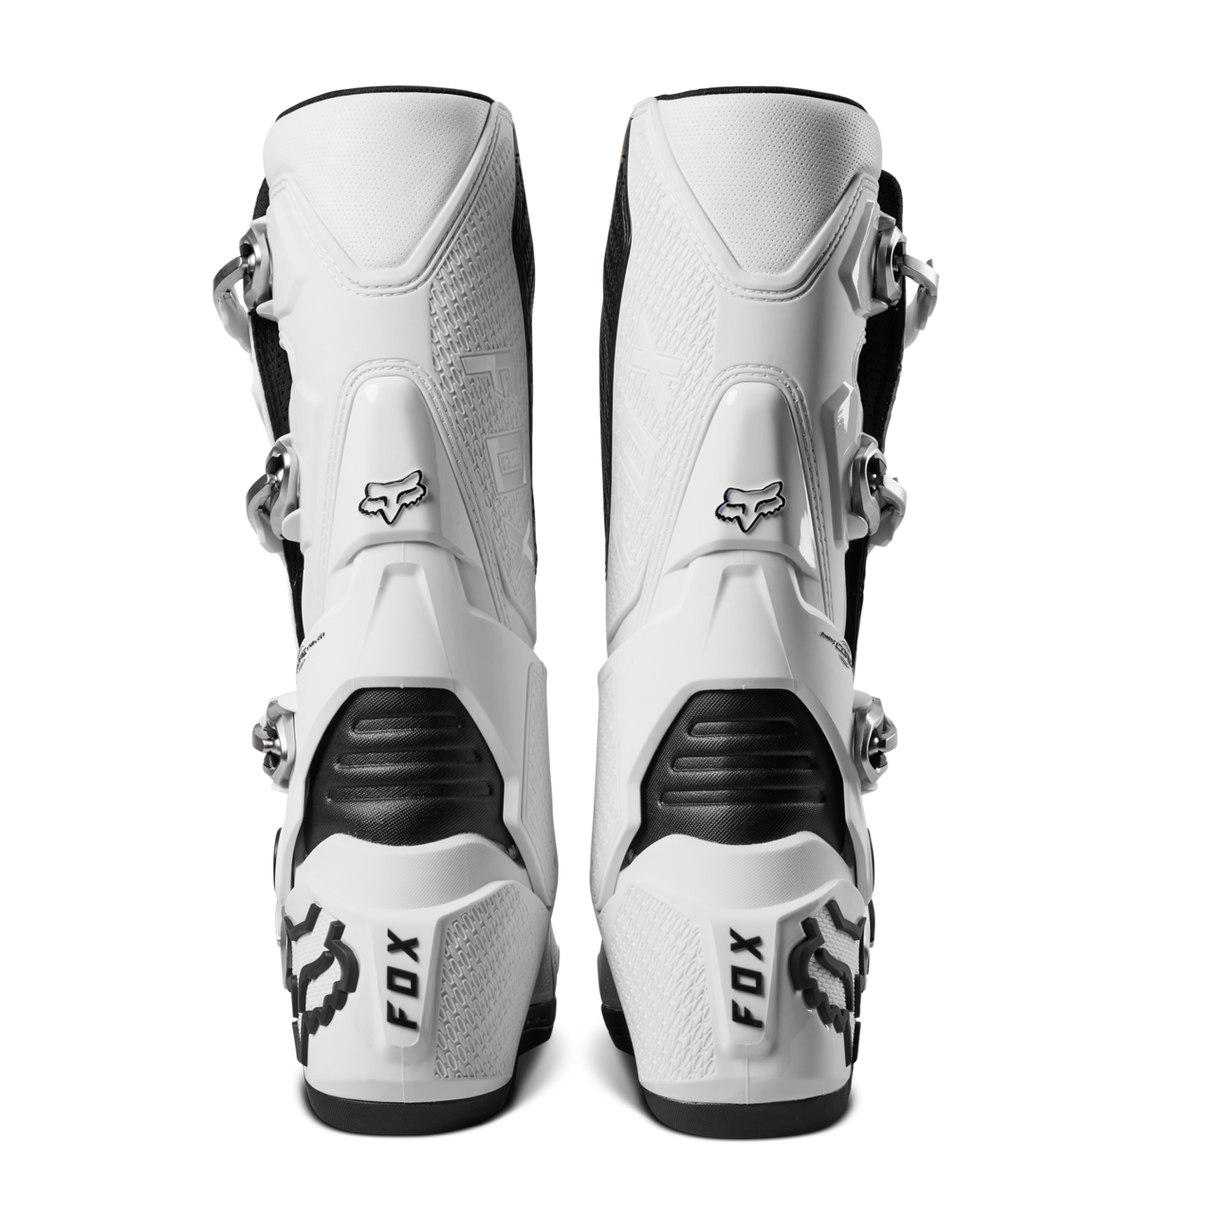 Fox Motion Boots White